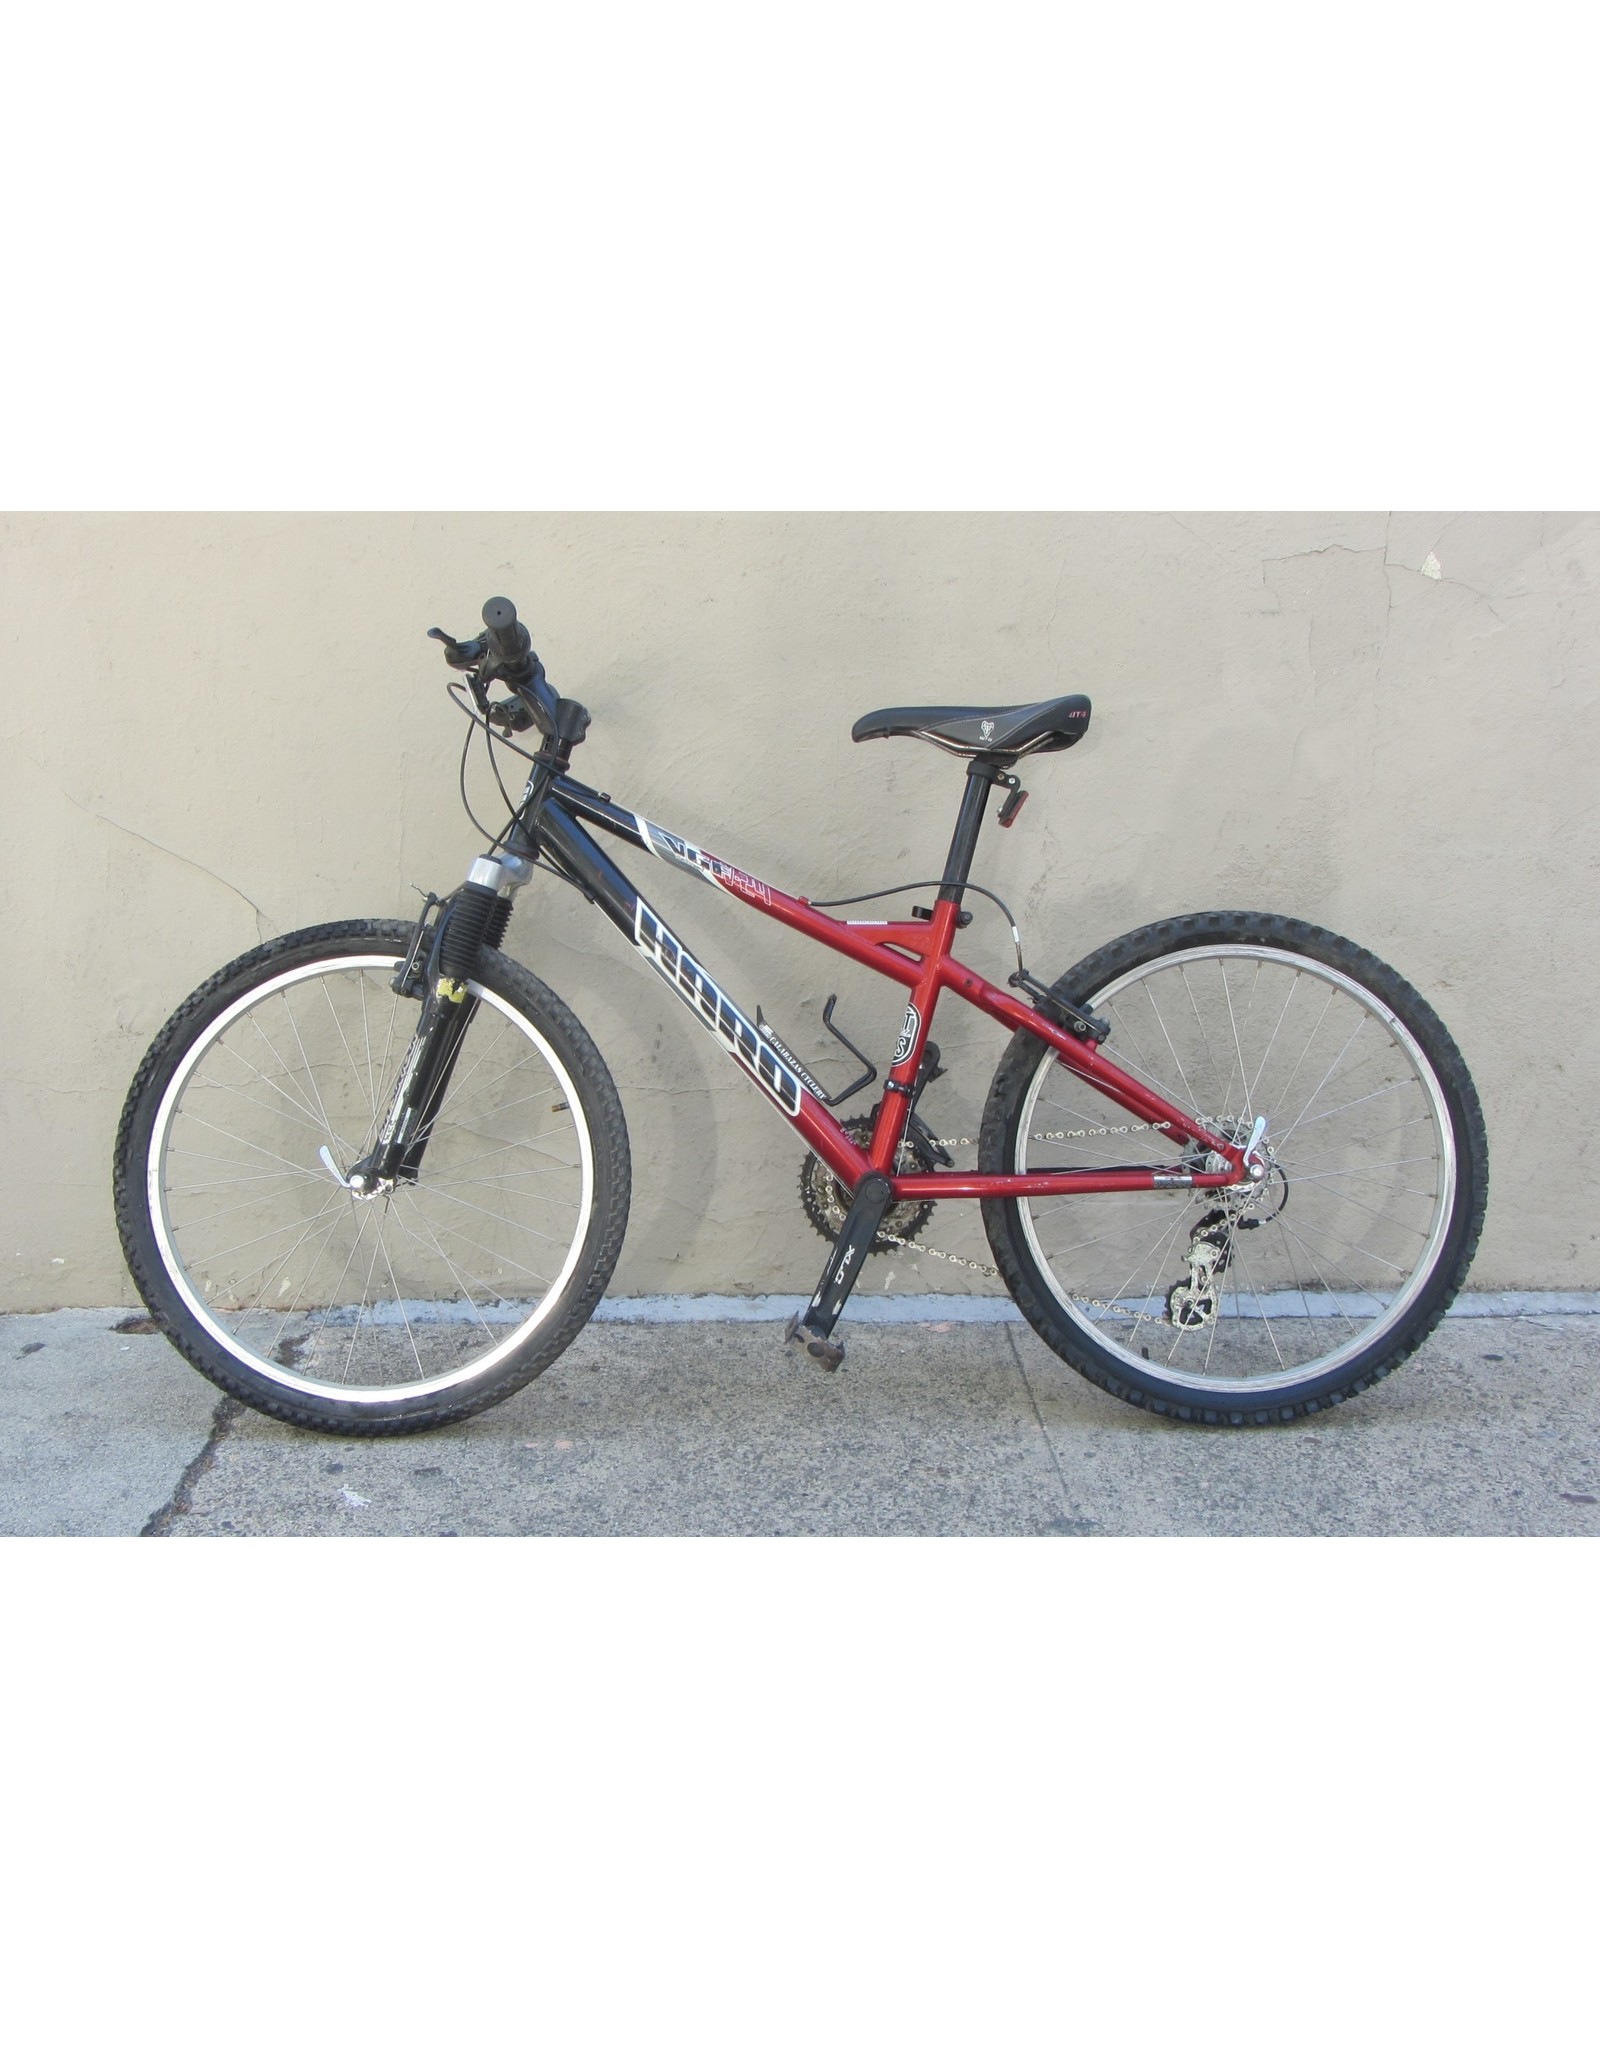 Haro Haro VGF V24 Youth Mountain Bicycle, 14 Inches, Red and Black